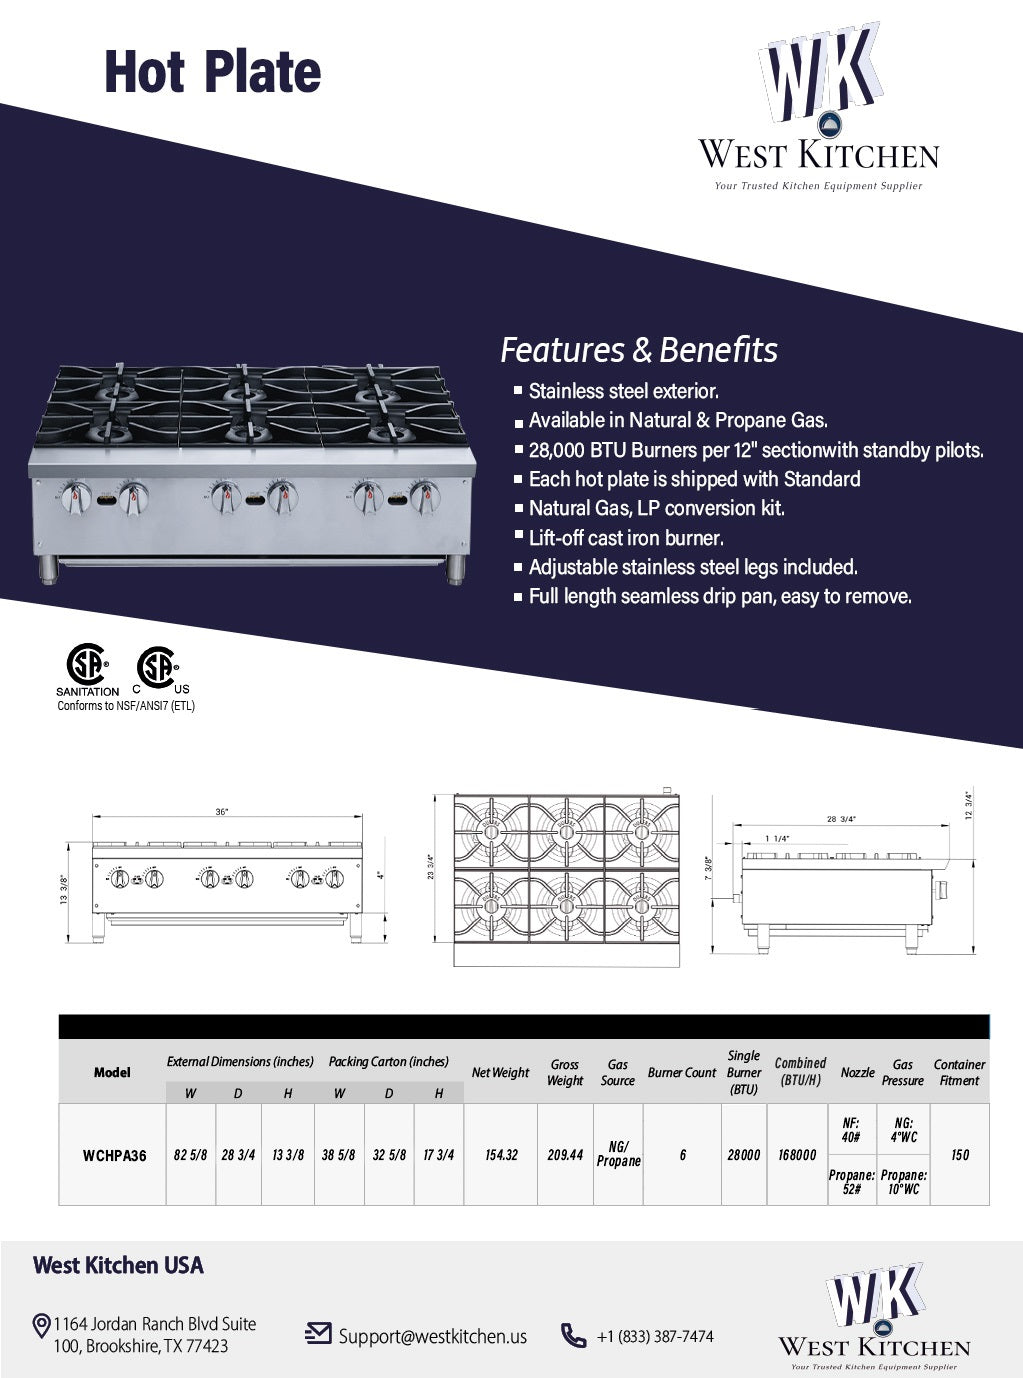 a brochure showing the features and benefits of a gas stove